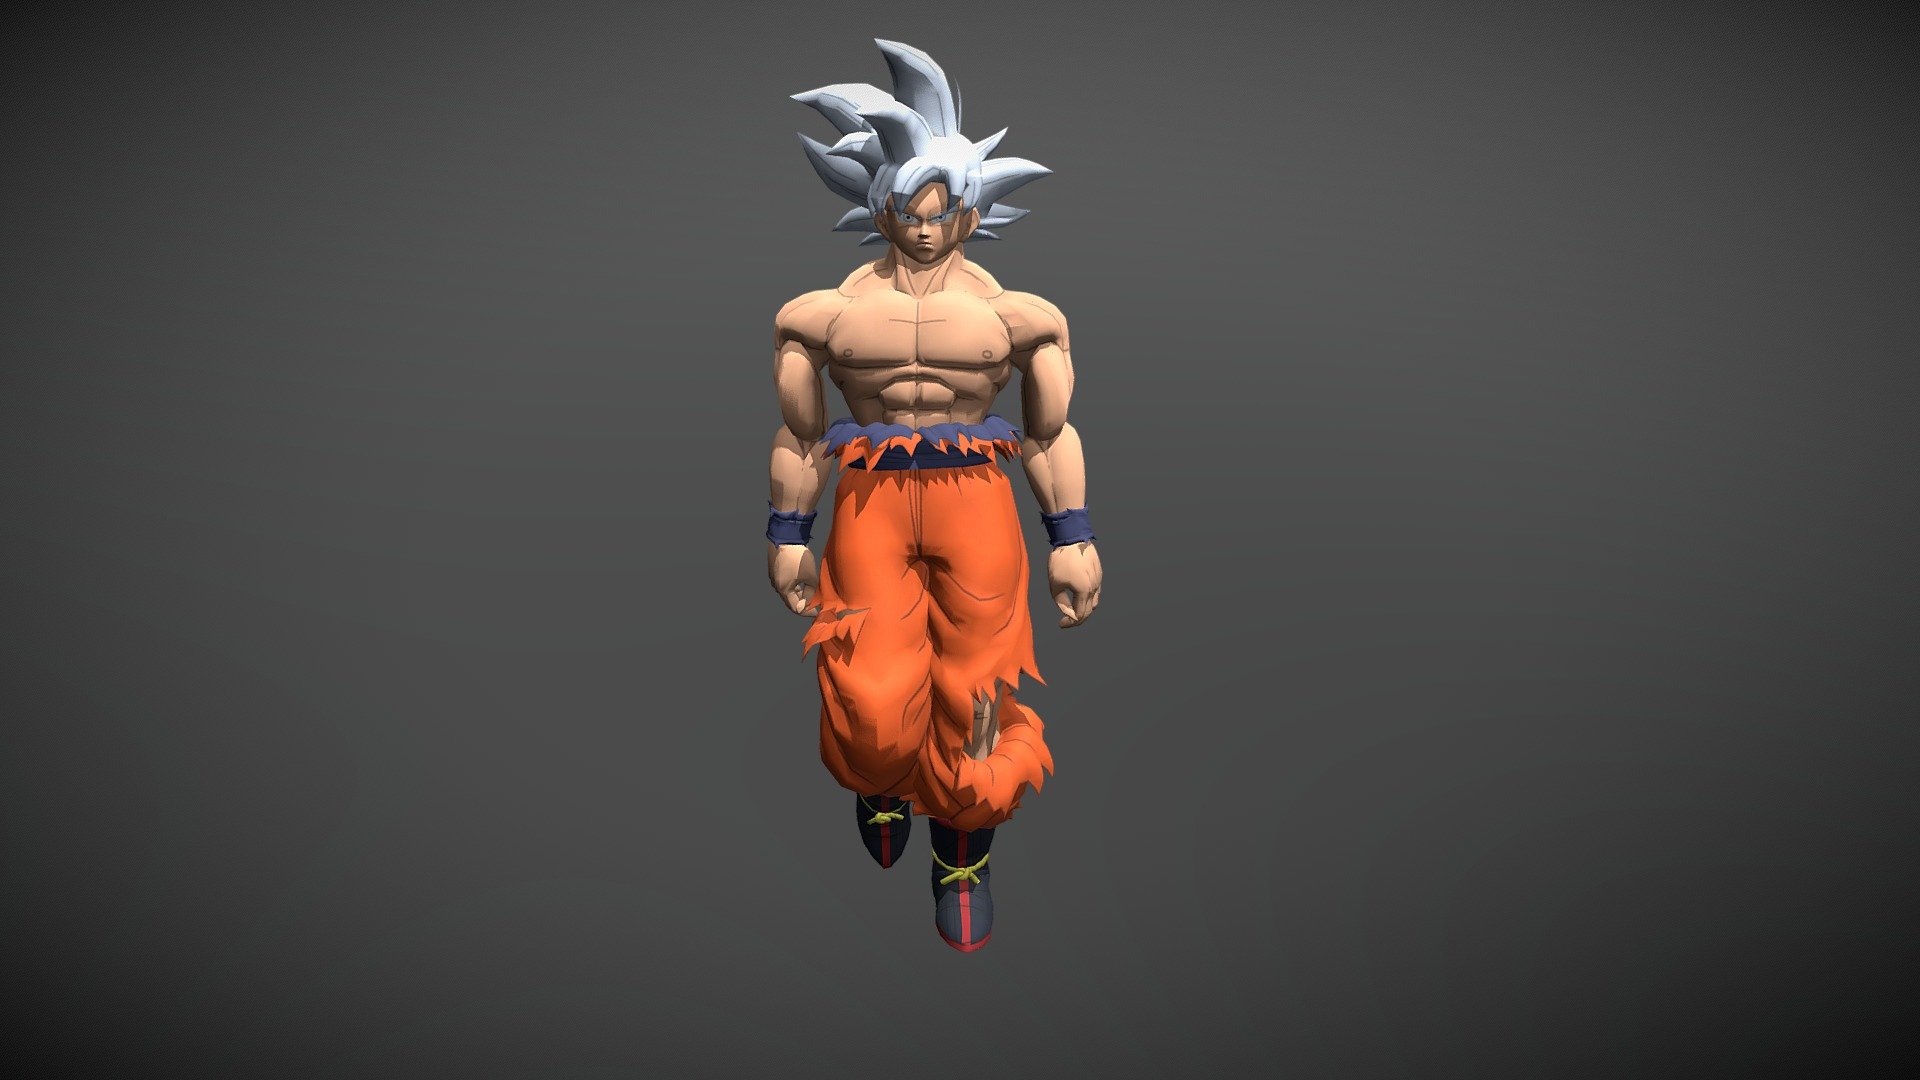 WATCH =https://youtu.be/W7n1Ms6b6UM

GOKU ULTRA INSTINCT Realistic Character RIGGED with 15+ Animations

PACKAGE INCLUDE




High quality polygonal model, correctly scaled for an accurate representation of the original object.

Model is built to real-world scale.

Many different format like blender, fbx, obj, iclone, dae

No additional plugin is needed to open the model.

3d print ready in different poses

Ready for animation

Loopable seperate Animations

High Quality materials and textures

Triangles = 24399

Vertices = 13563

Edges = 37362

Faces = 24399

ANIMATION PACK




Walk

Funny walk

Run

Run Fast

Jump

Hop

Dance 1

Dance 2

Hip Hop

Cheers

Look Around

Fight

Defend 1

Defend 2

Throw
 - GOKU ULTRA INSTINCT with Animation - Buy Royalty Free 3D model by Bilal Creation Production (@bilalcreation) 3d model